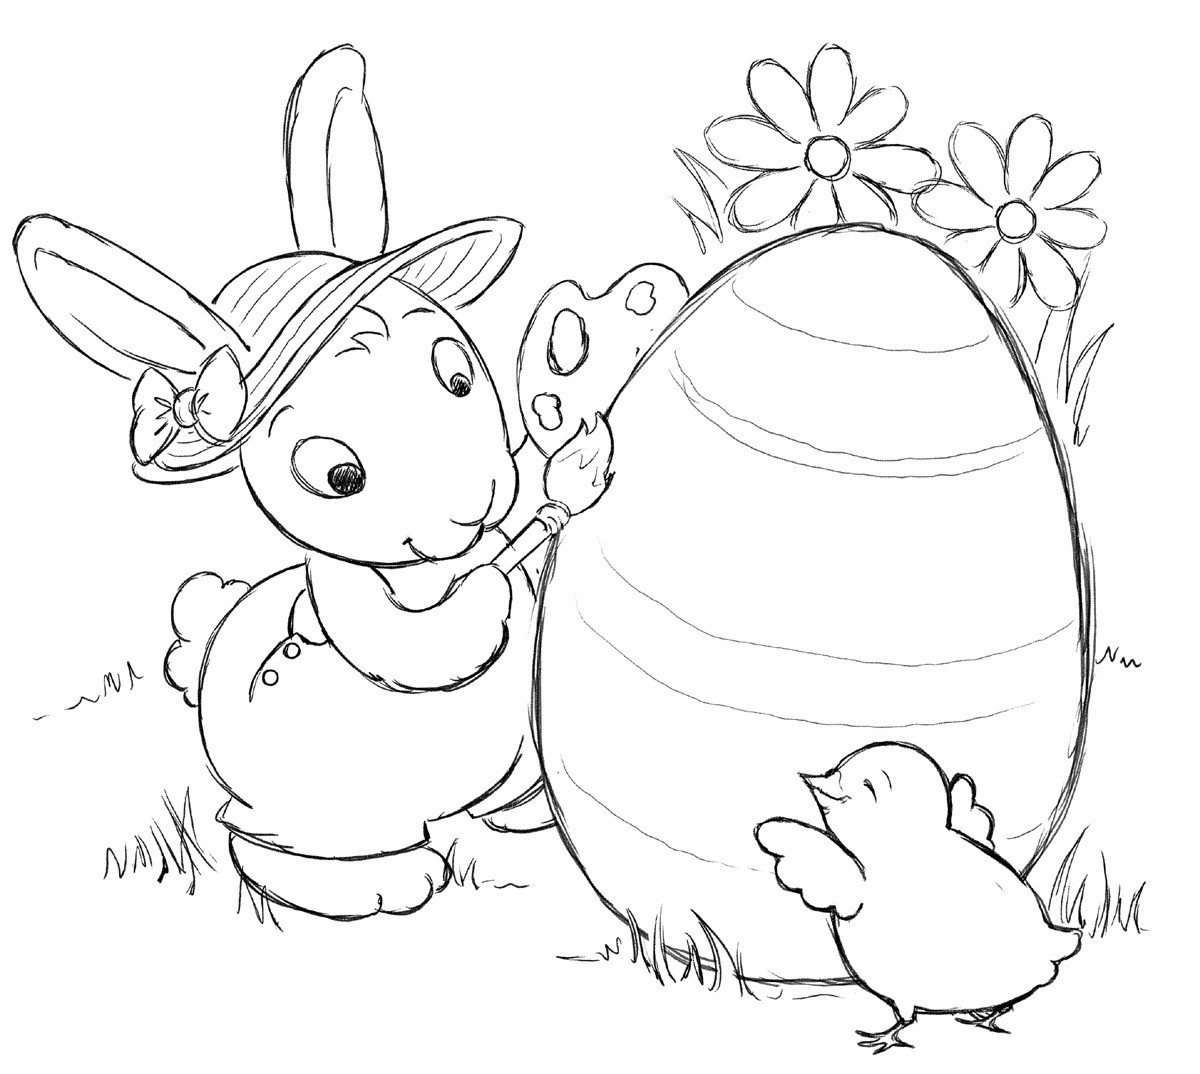 Bunny Coloring Pages For Kids
 Free Printable Easter Bunny Coloring Pages For Kids